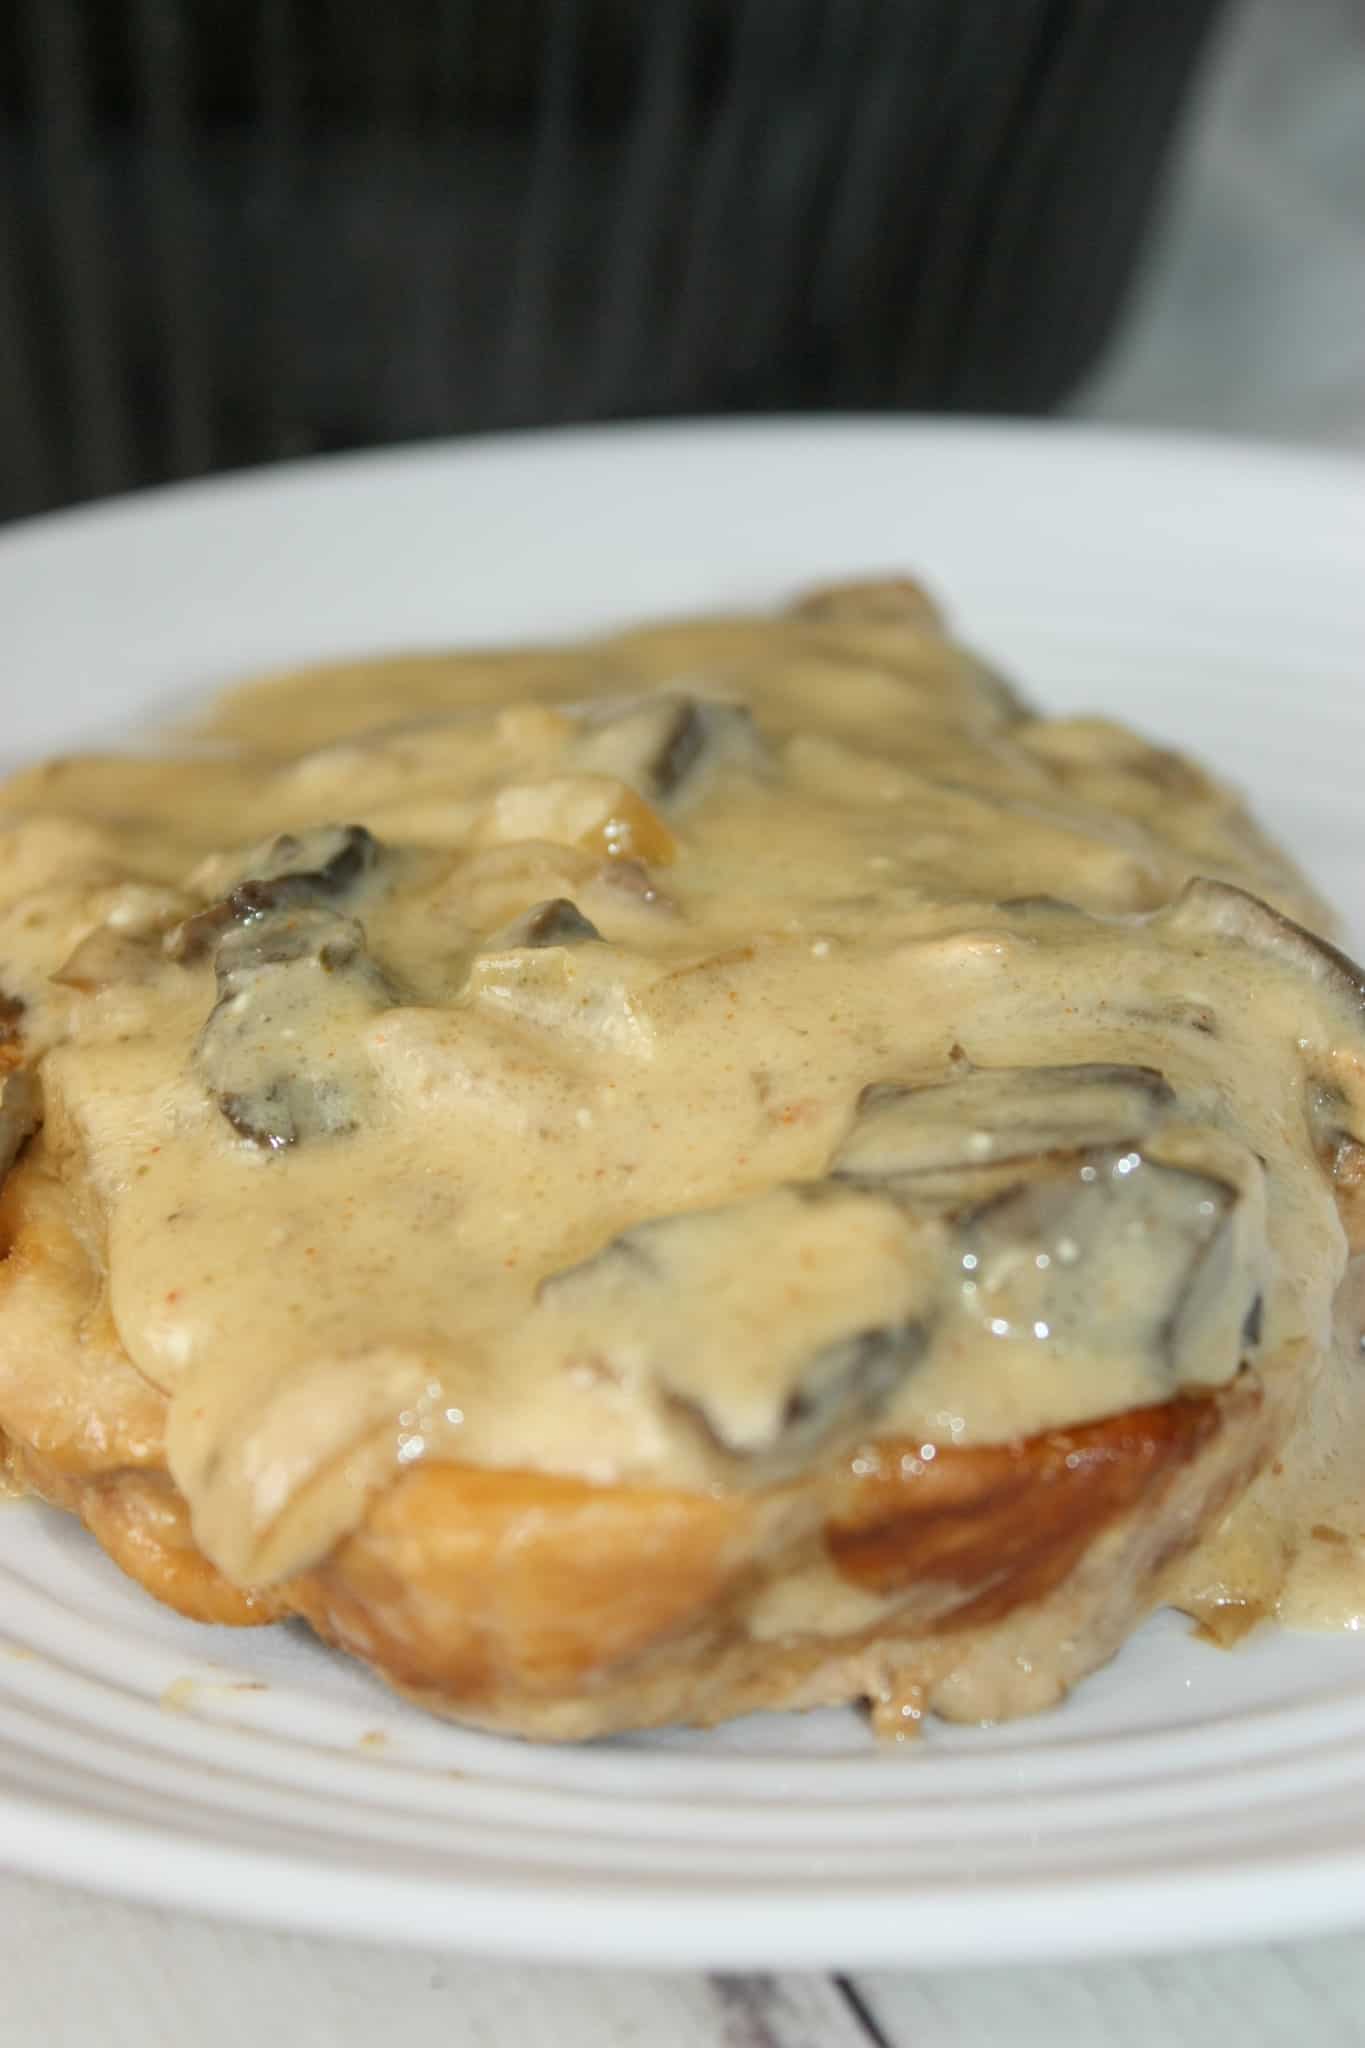 Crock Pot Pork Chops with Mushrooms is an easy slow cooker recipe for any time of the year.  Bone in pork chops smothered in a creamy mushroom gravy makes a wonderful comfort food main course.